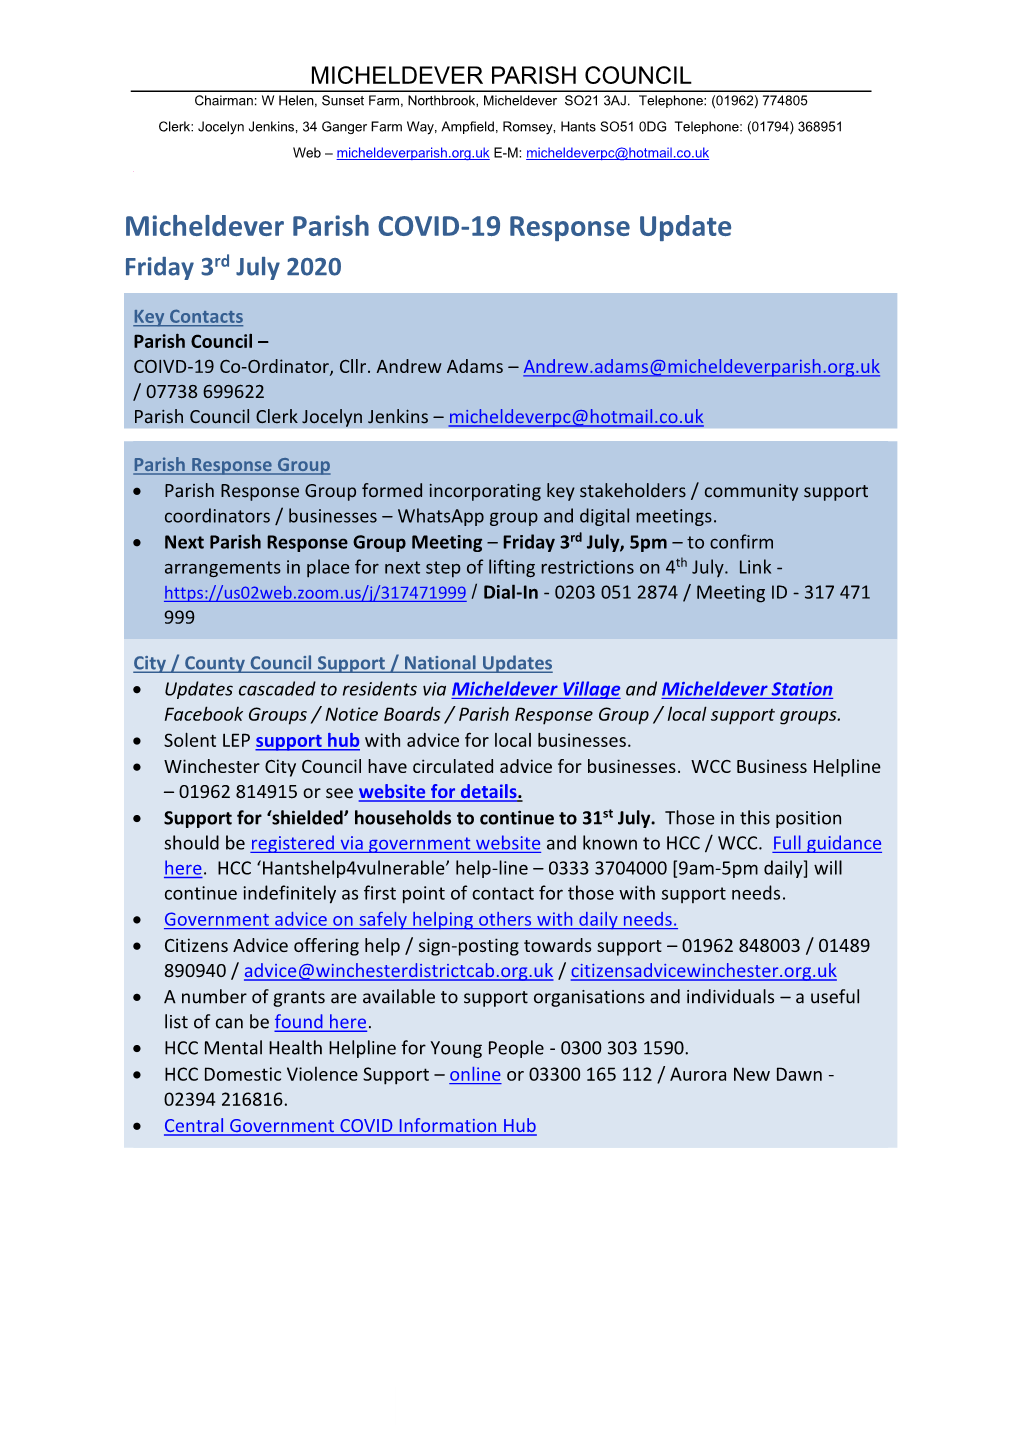 Micheldever Parish COVID-19 Response Update Friday 3Rd July 2020